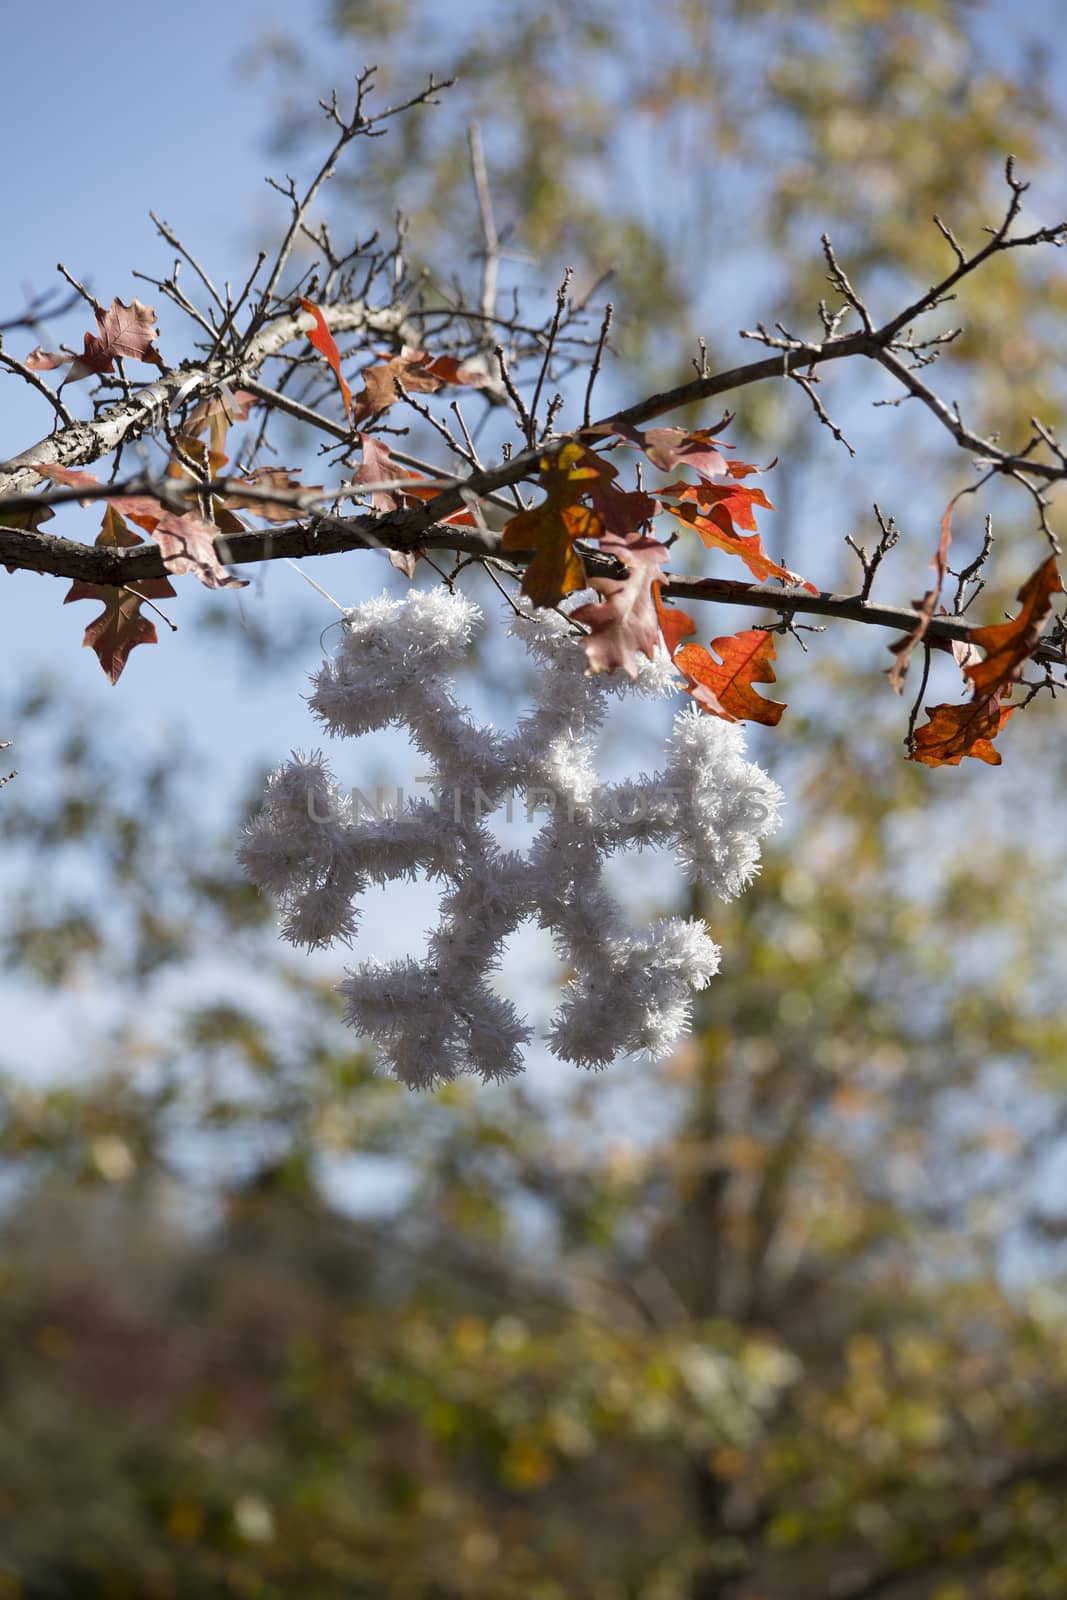 Christmas snowflake decoration hanging from a tree outdoors